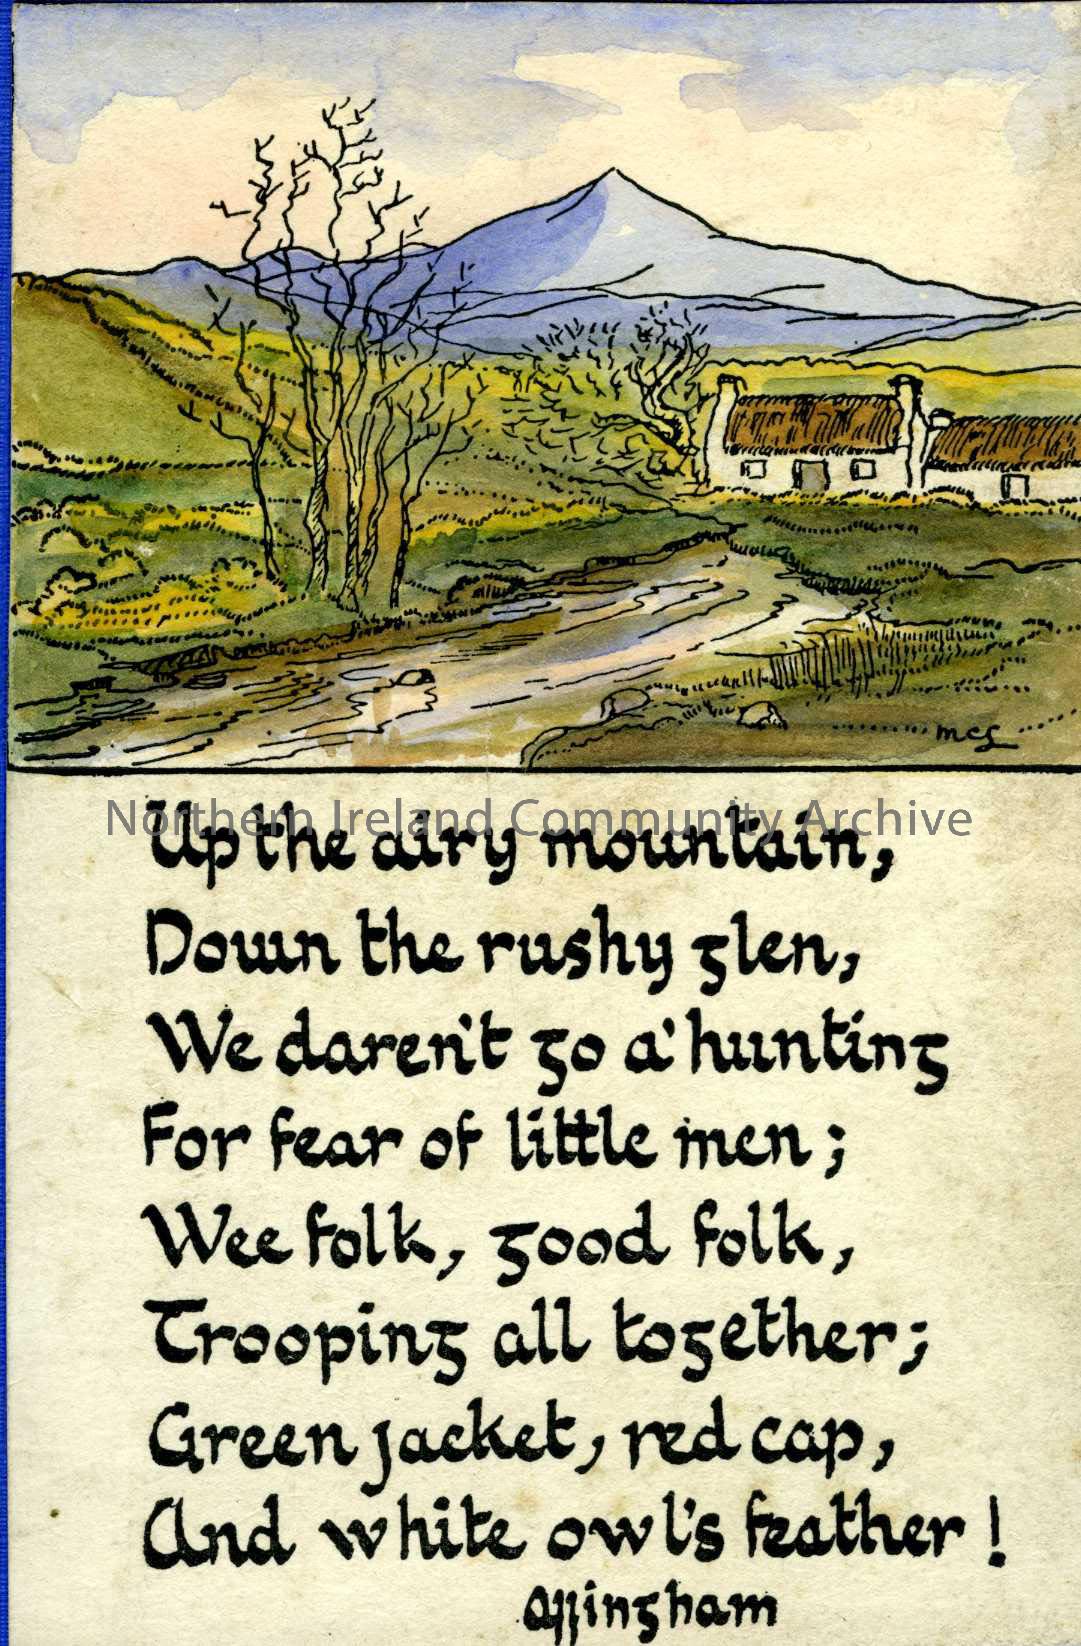 This is an illustrated poem, a verse by William Allingham, affixed to the front cover of CM:2011:457.1 The illustration has the style of that found on…